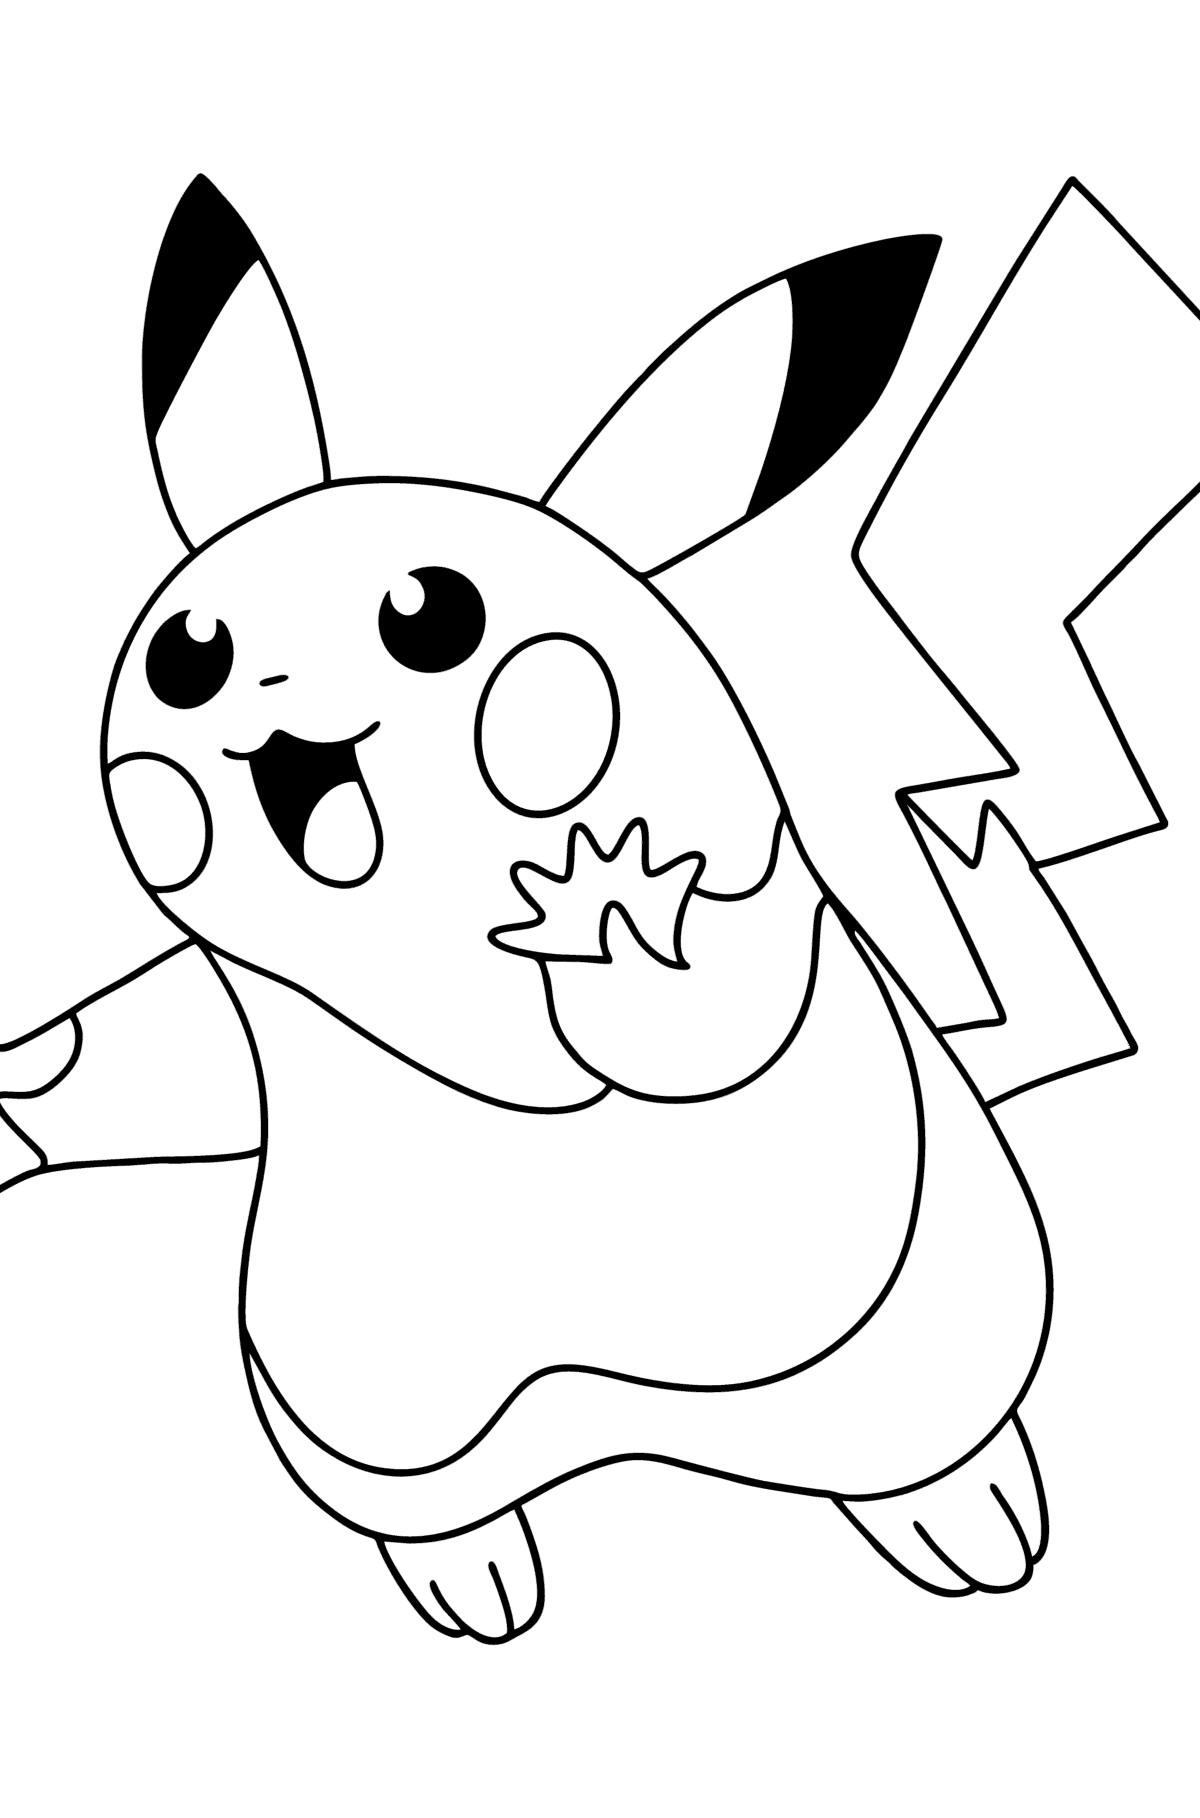 Coloring page Pokémon Go Picachu - Coloring Pages for Kids